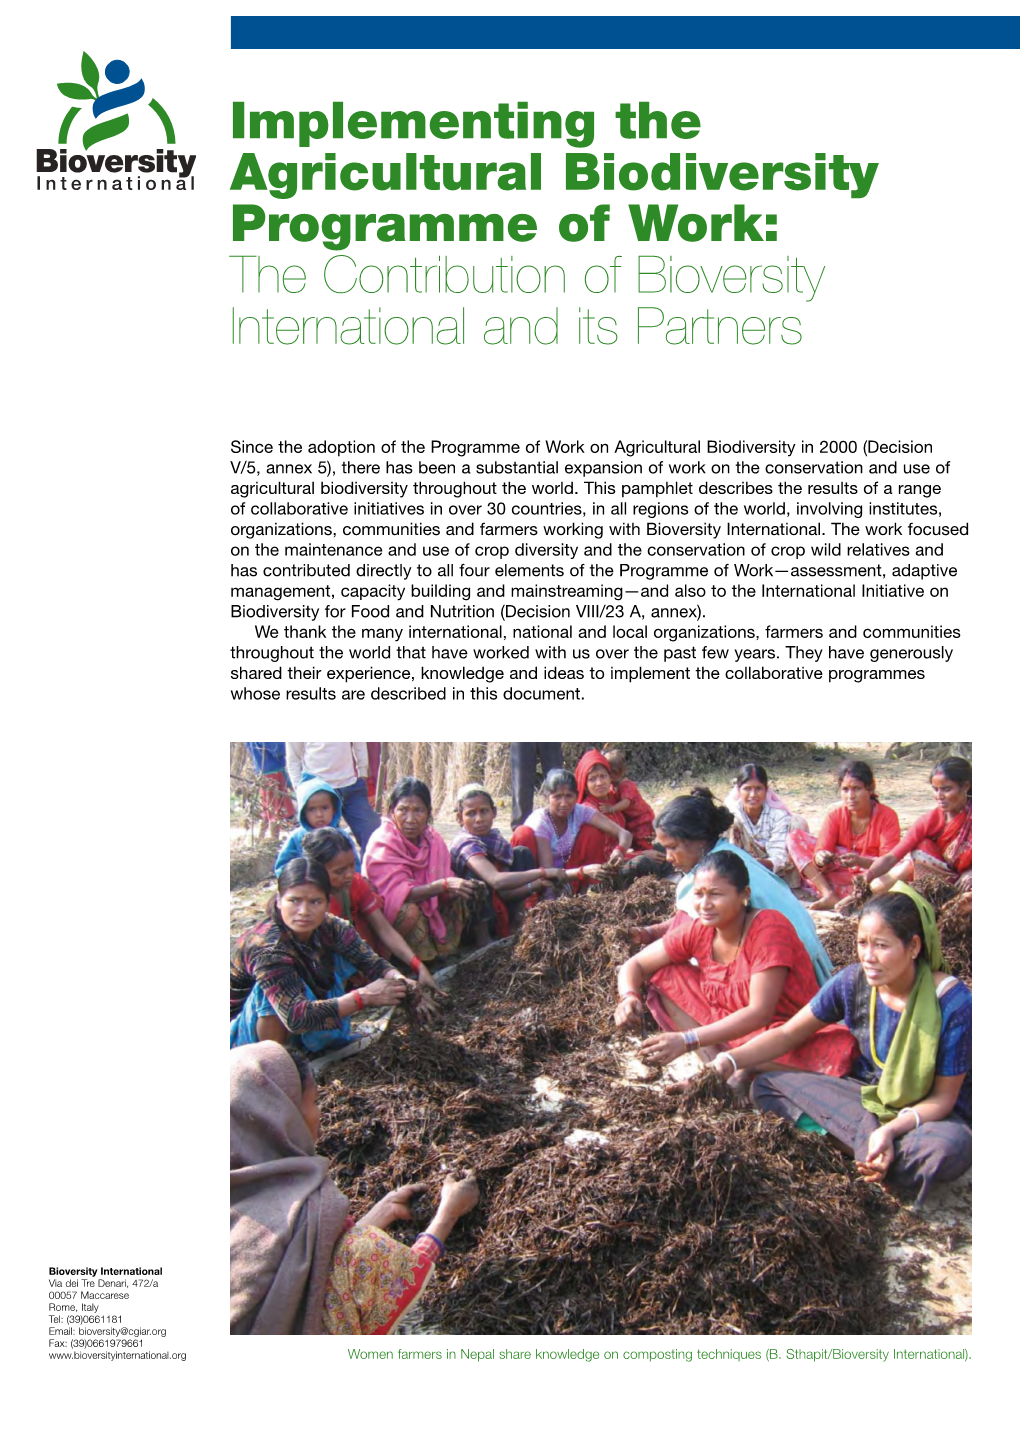 Implementing the Agricultural Biodiversity Programme of Work: the Contribution of Bioversity International and Its Partners